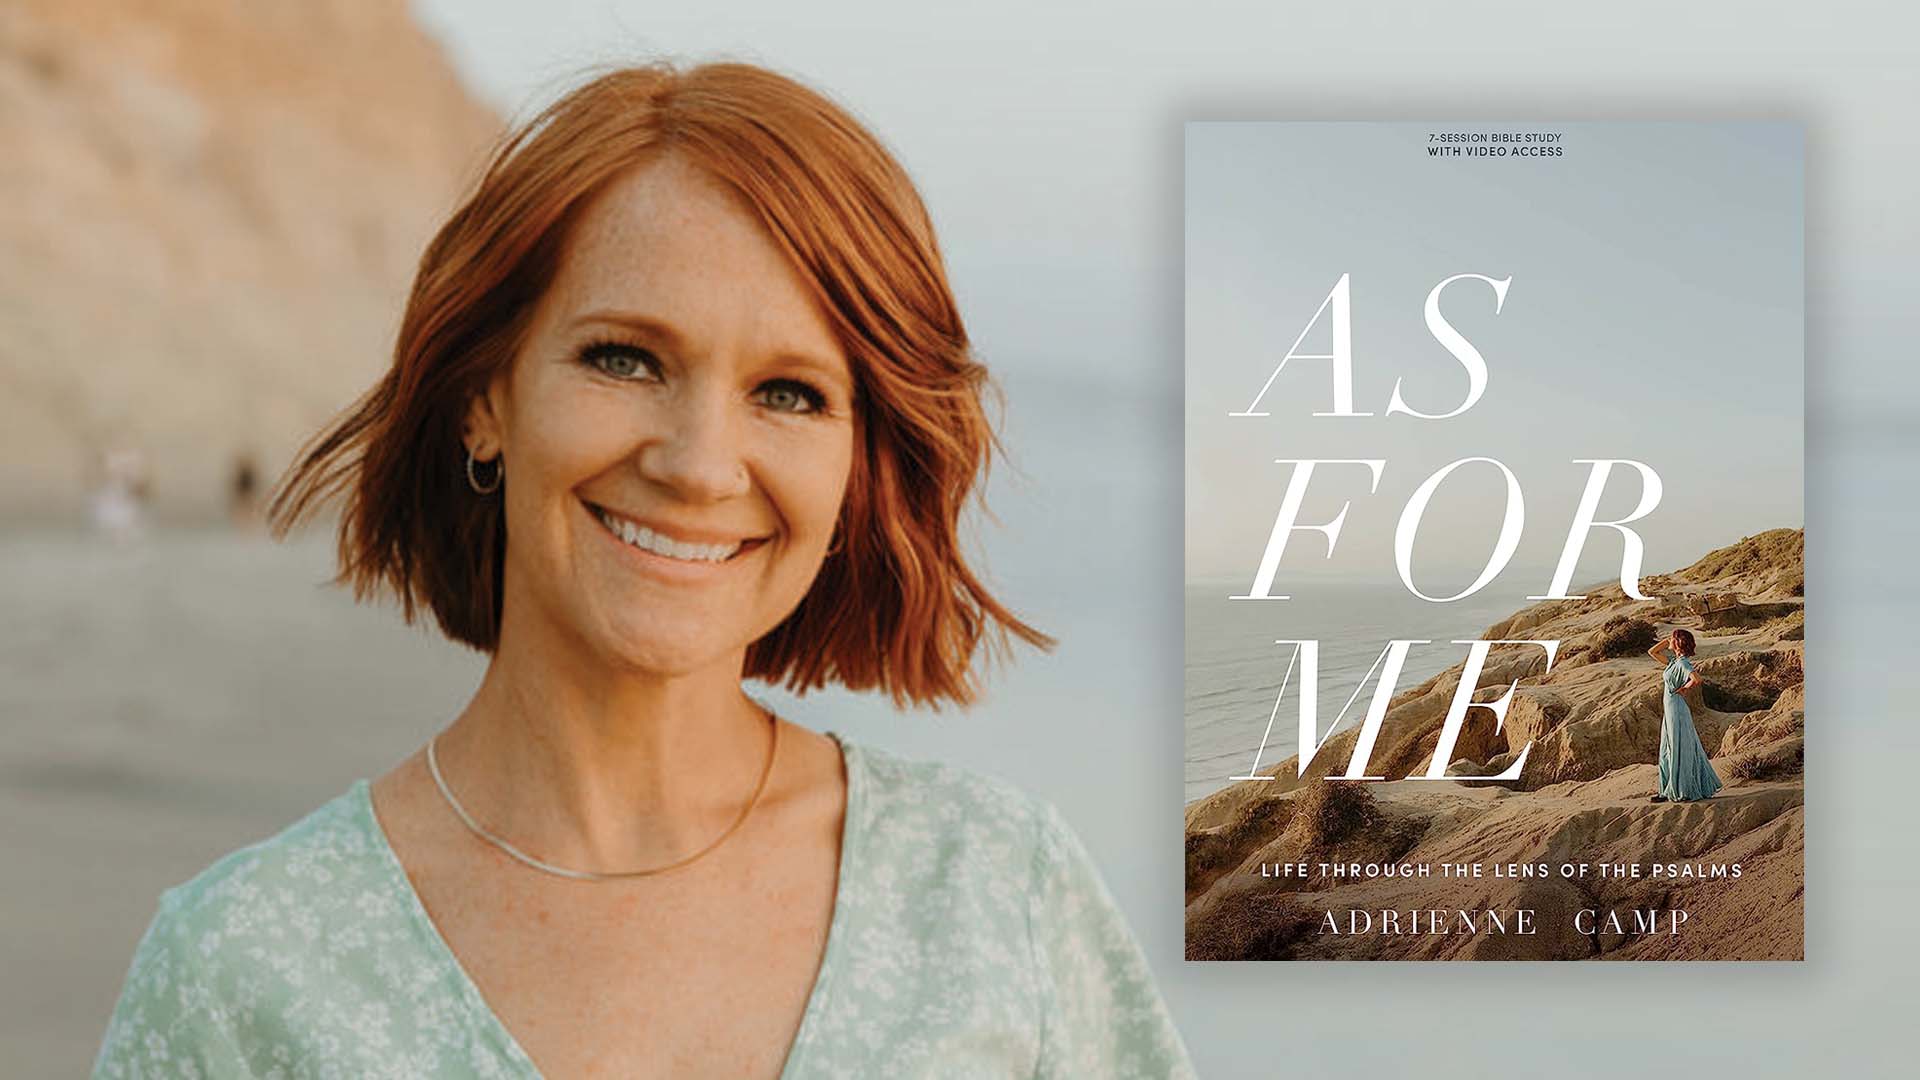 Adrienne Camp's new Bible Study Through Psalms "As For Me"